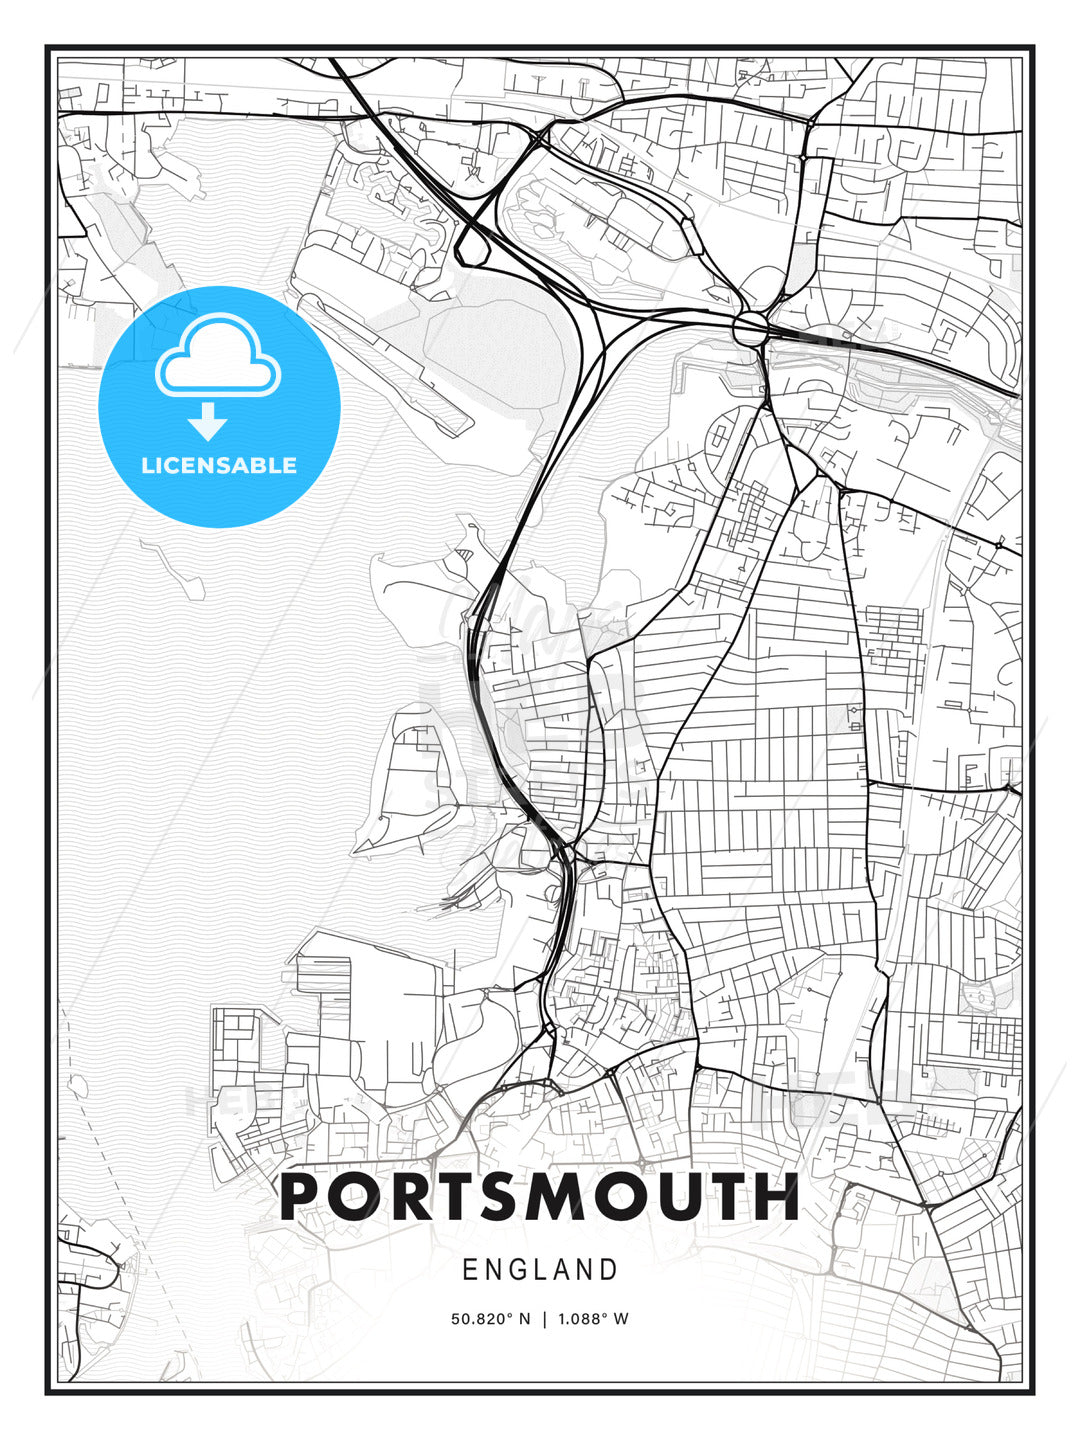 Portsmouth, England, Modern Print Template in Various Formats - HEBSTREITS Sketches